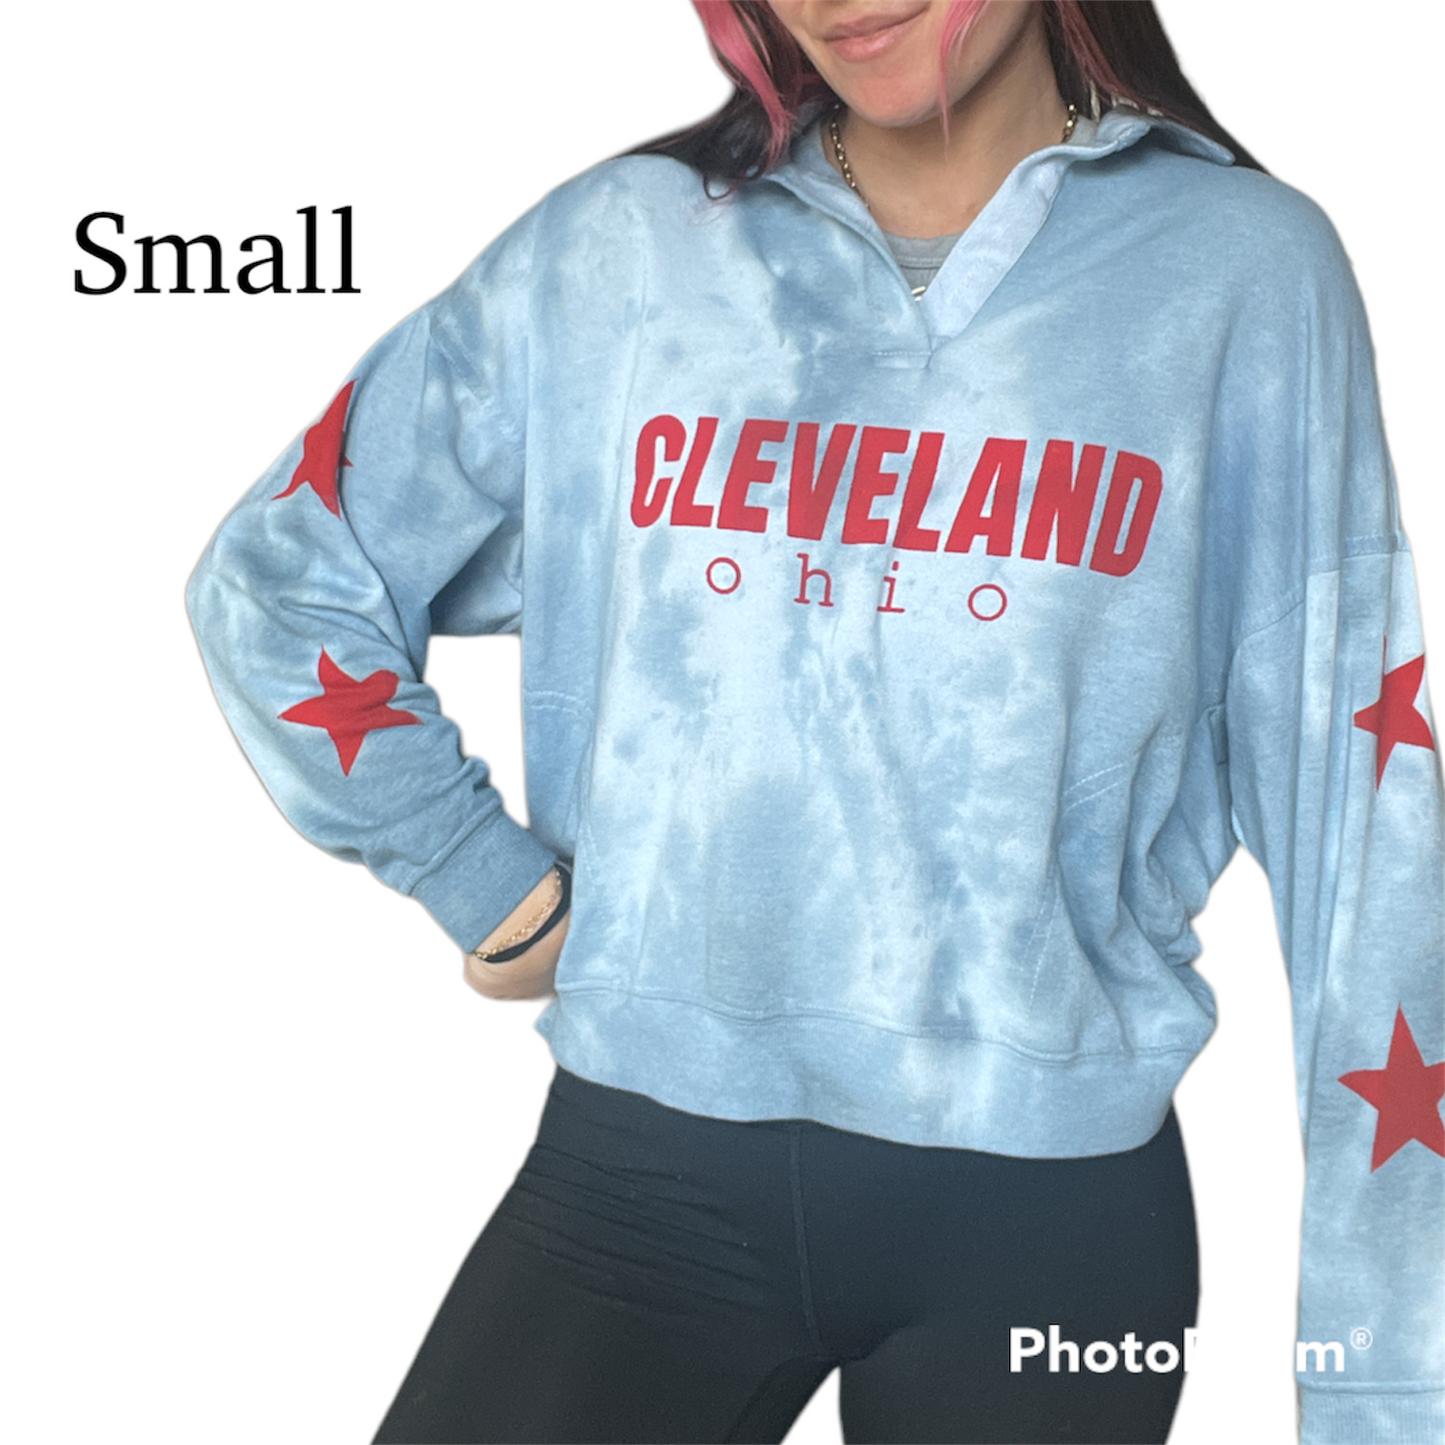 Cleveland star sleeve sweater